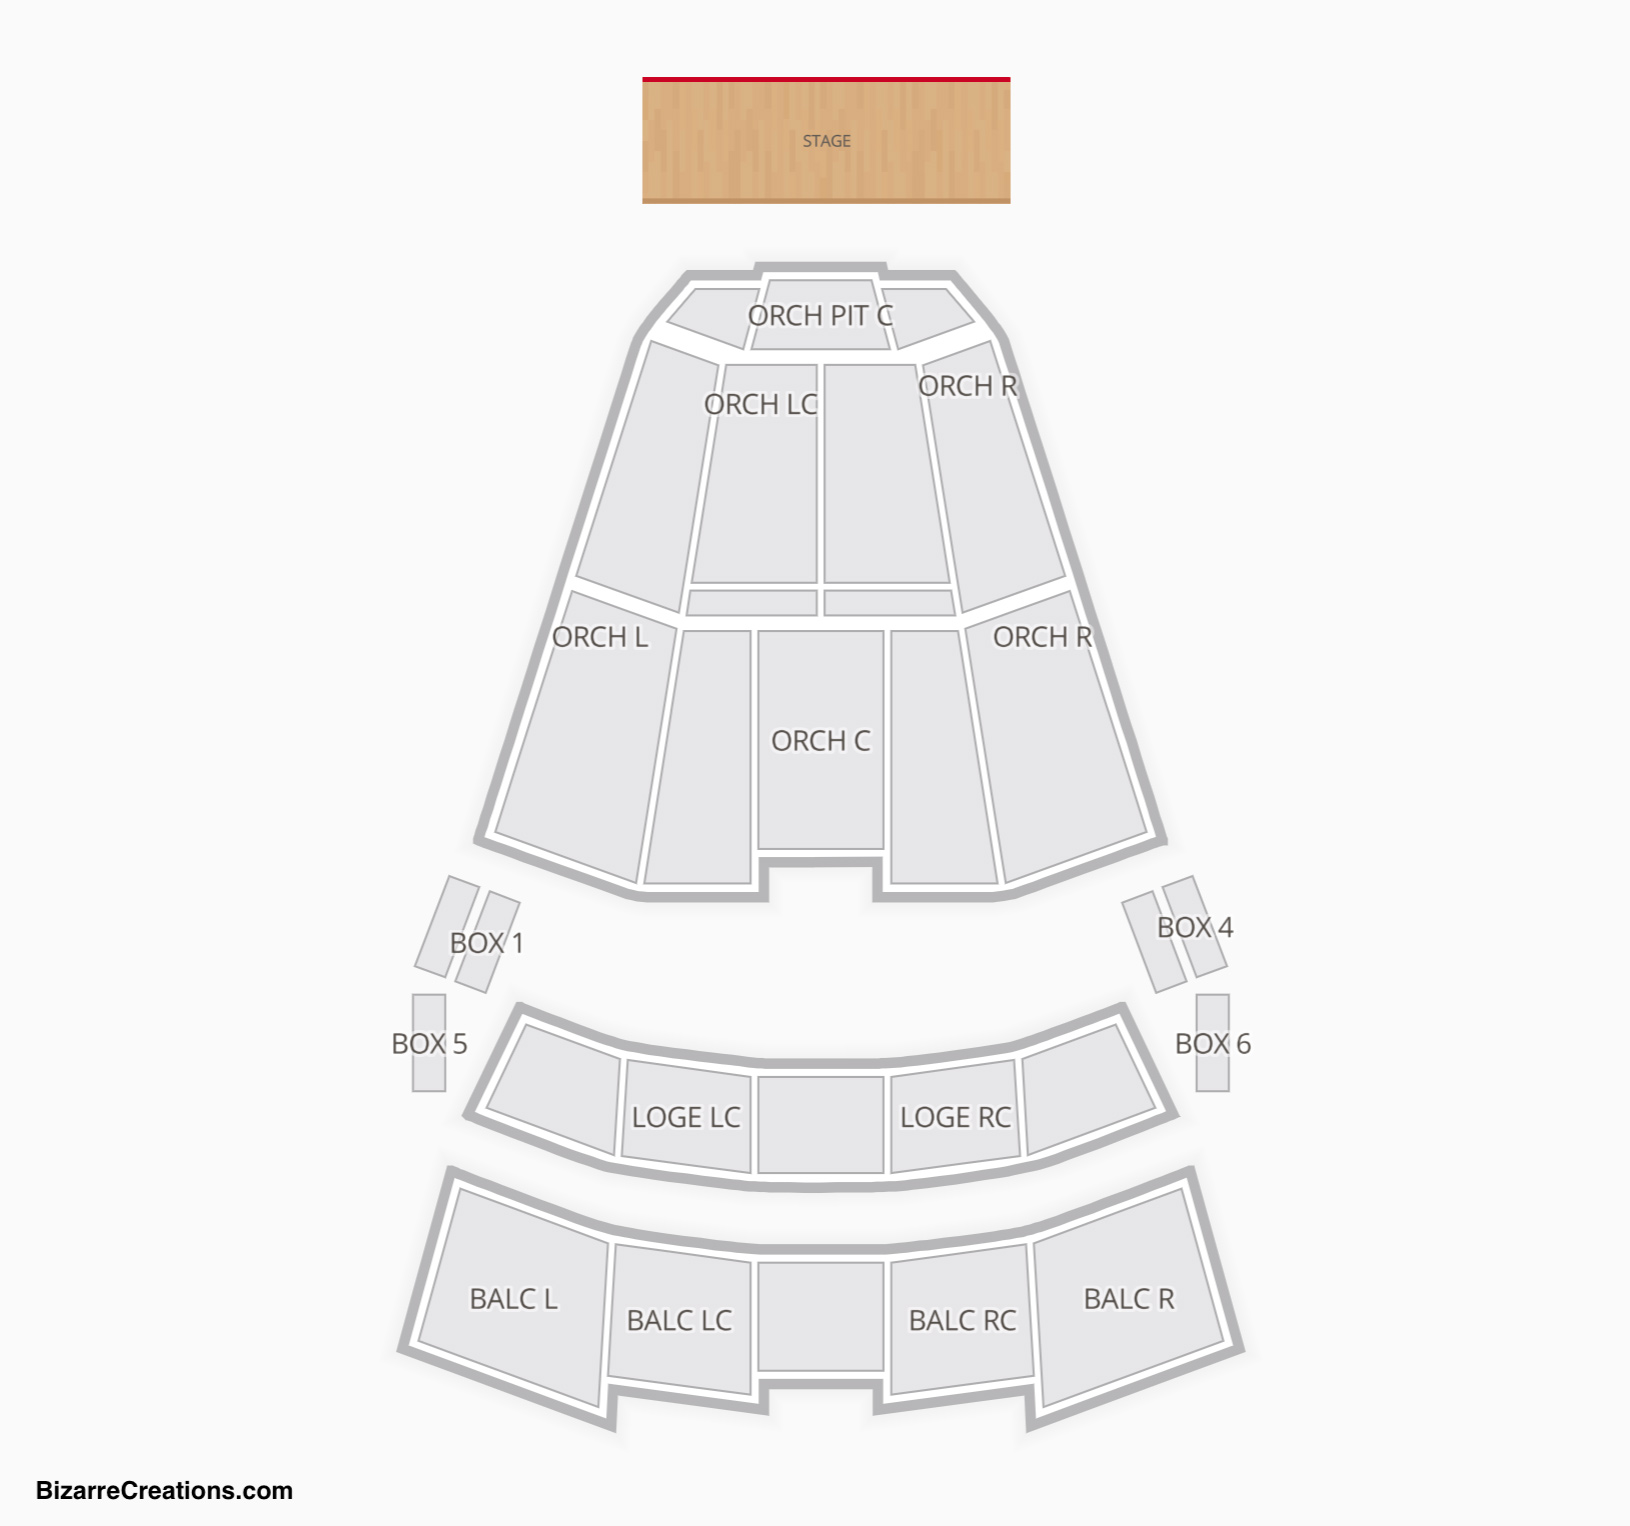 Seating Chart Theater Jacksonville